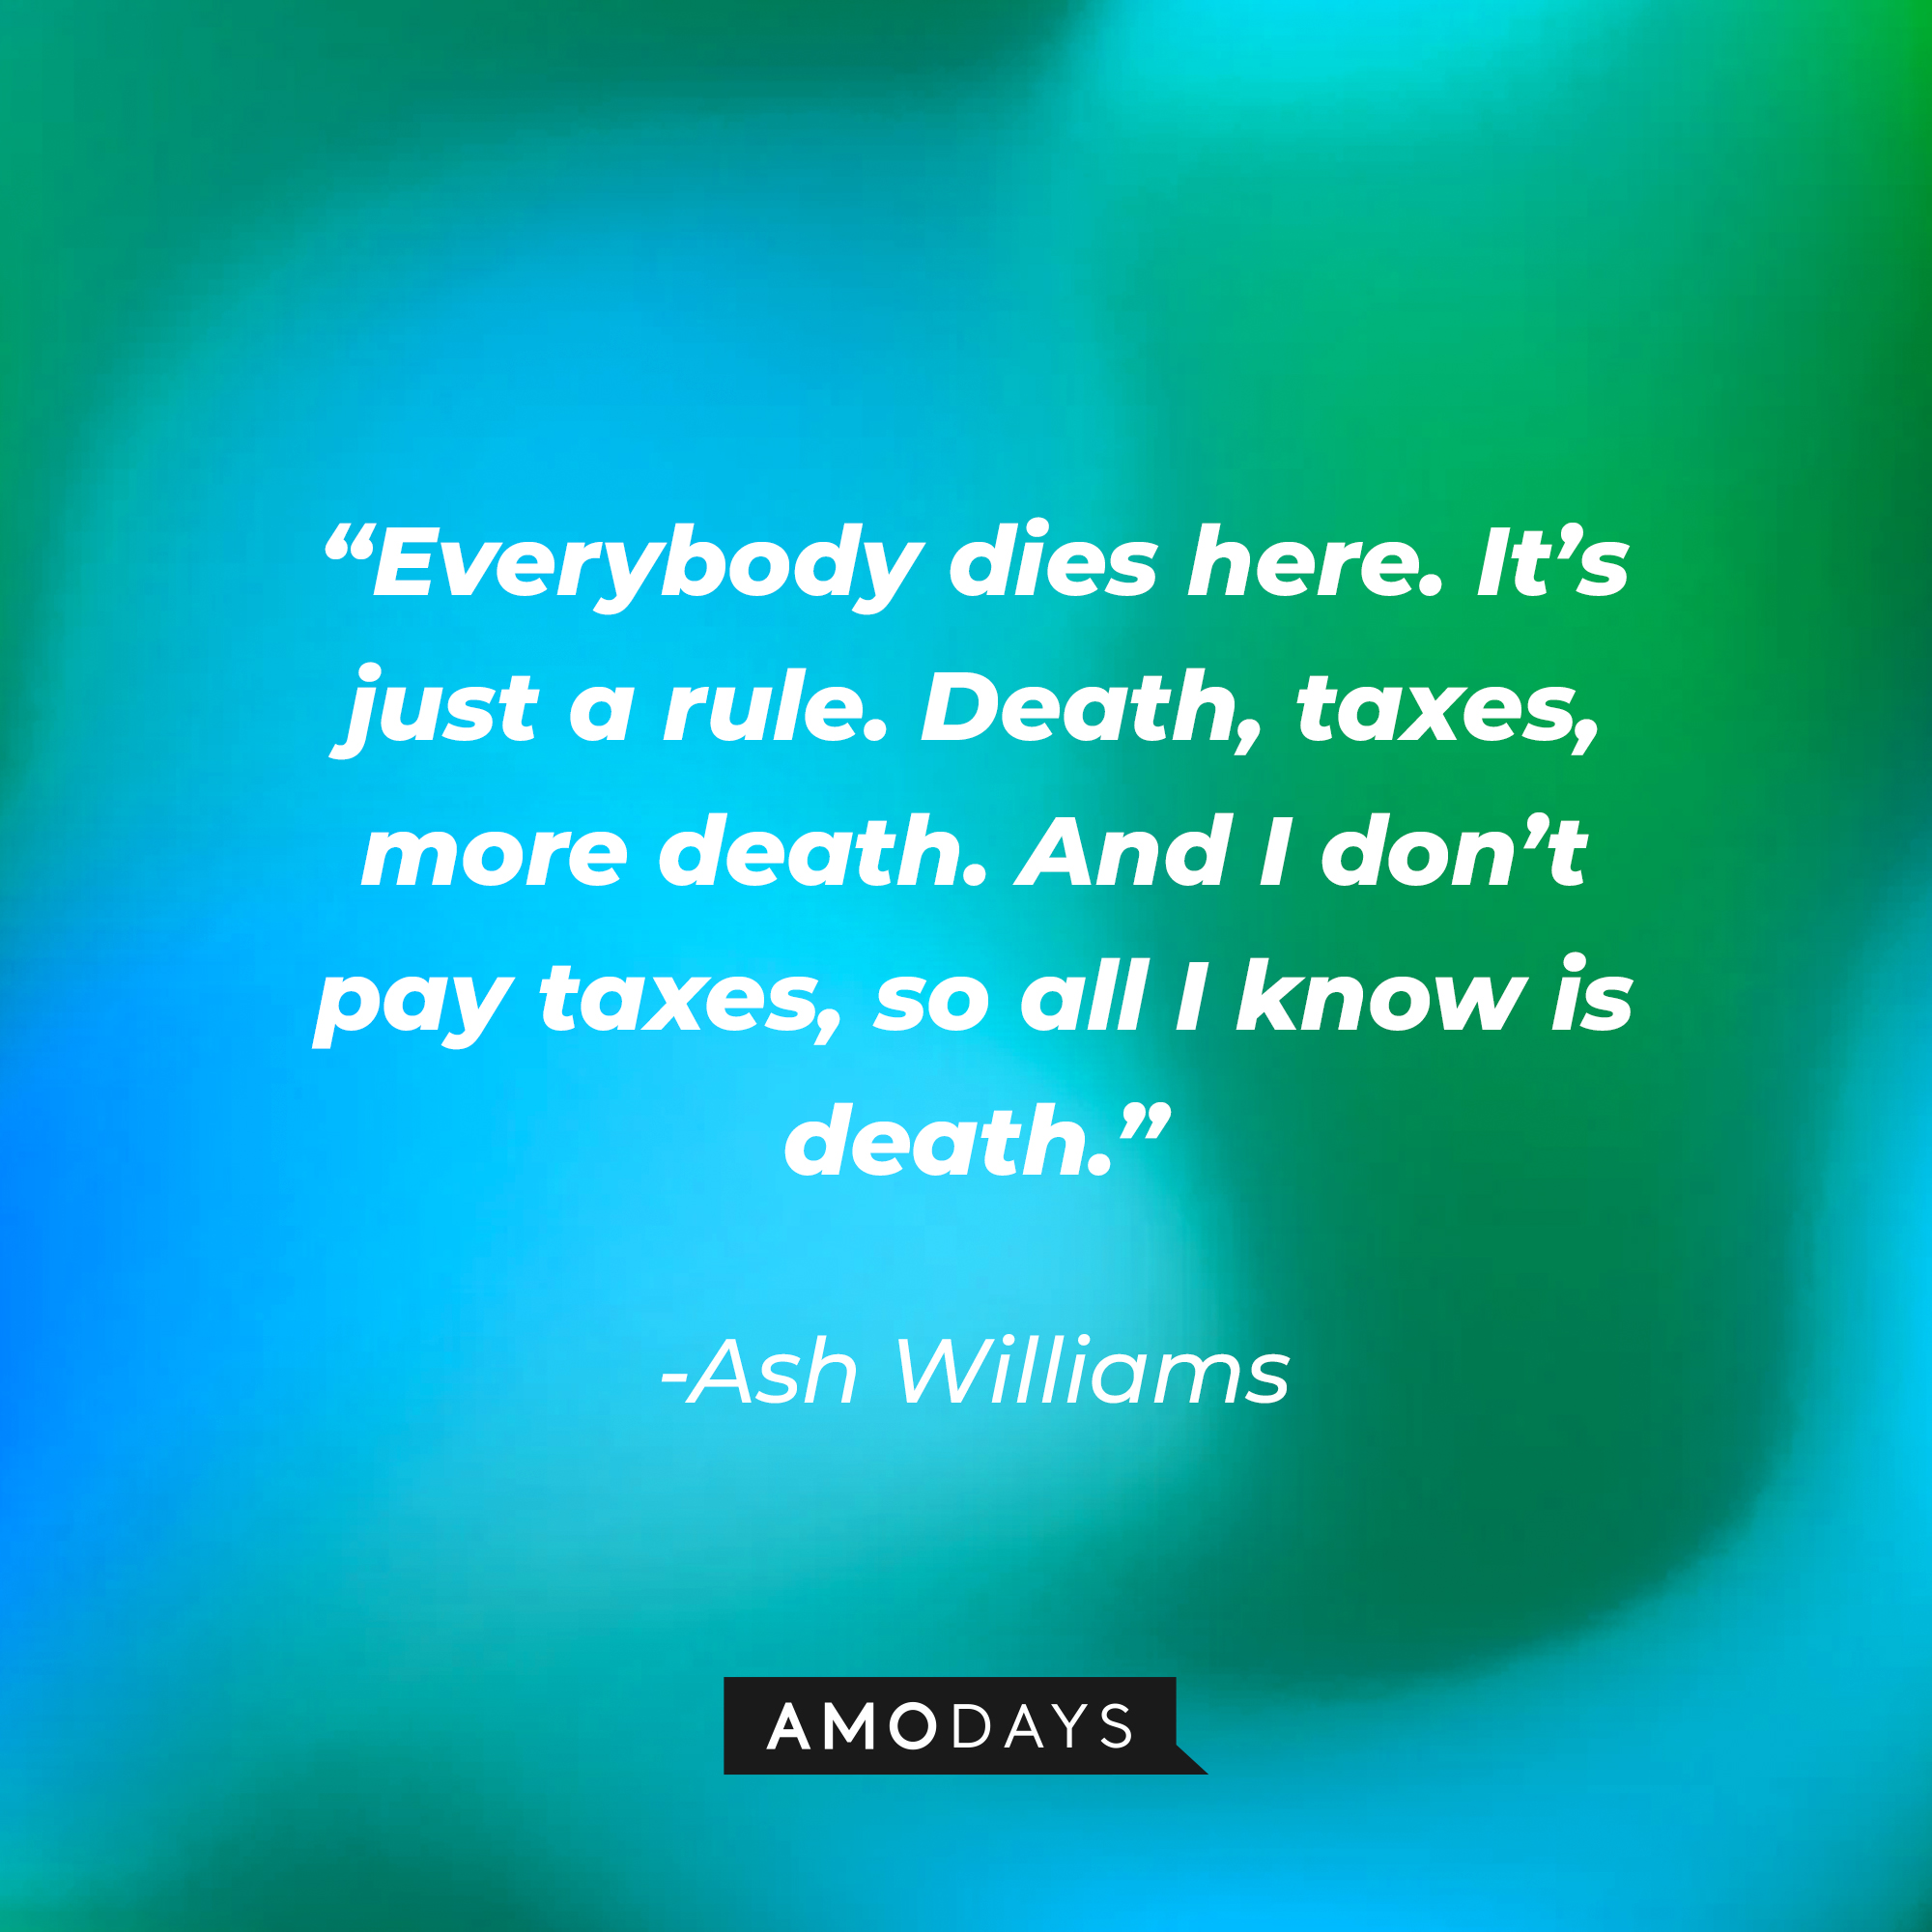 Ash Williams' quote: “Everybody dies here. It’s just a rule. Death, taxes, more death. And I don’t pay taxes, so all I know is death.” | Source: Amodays